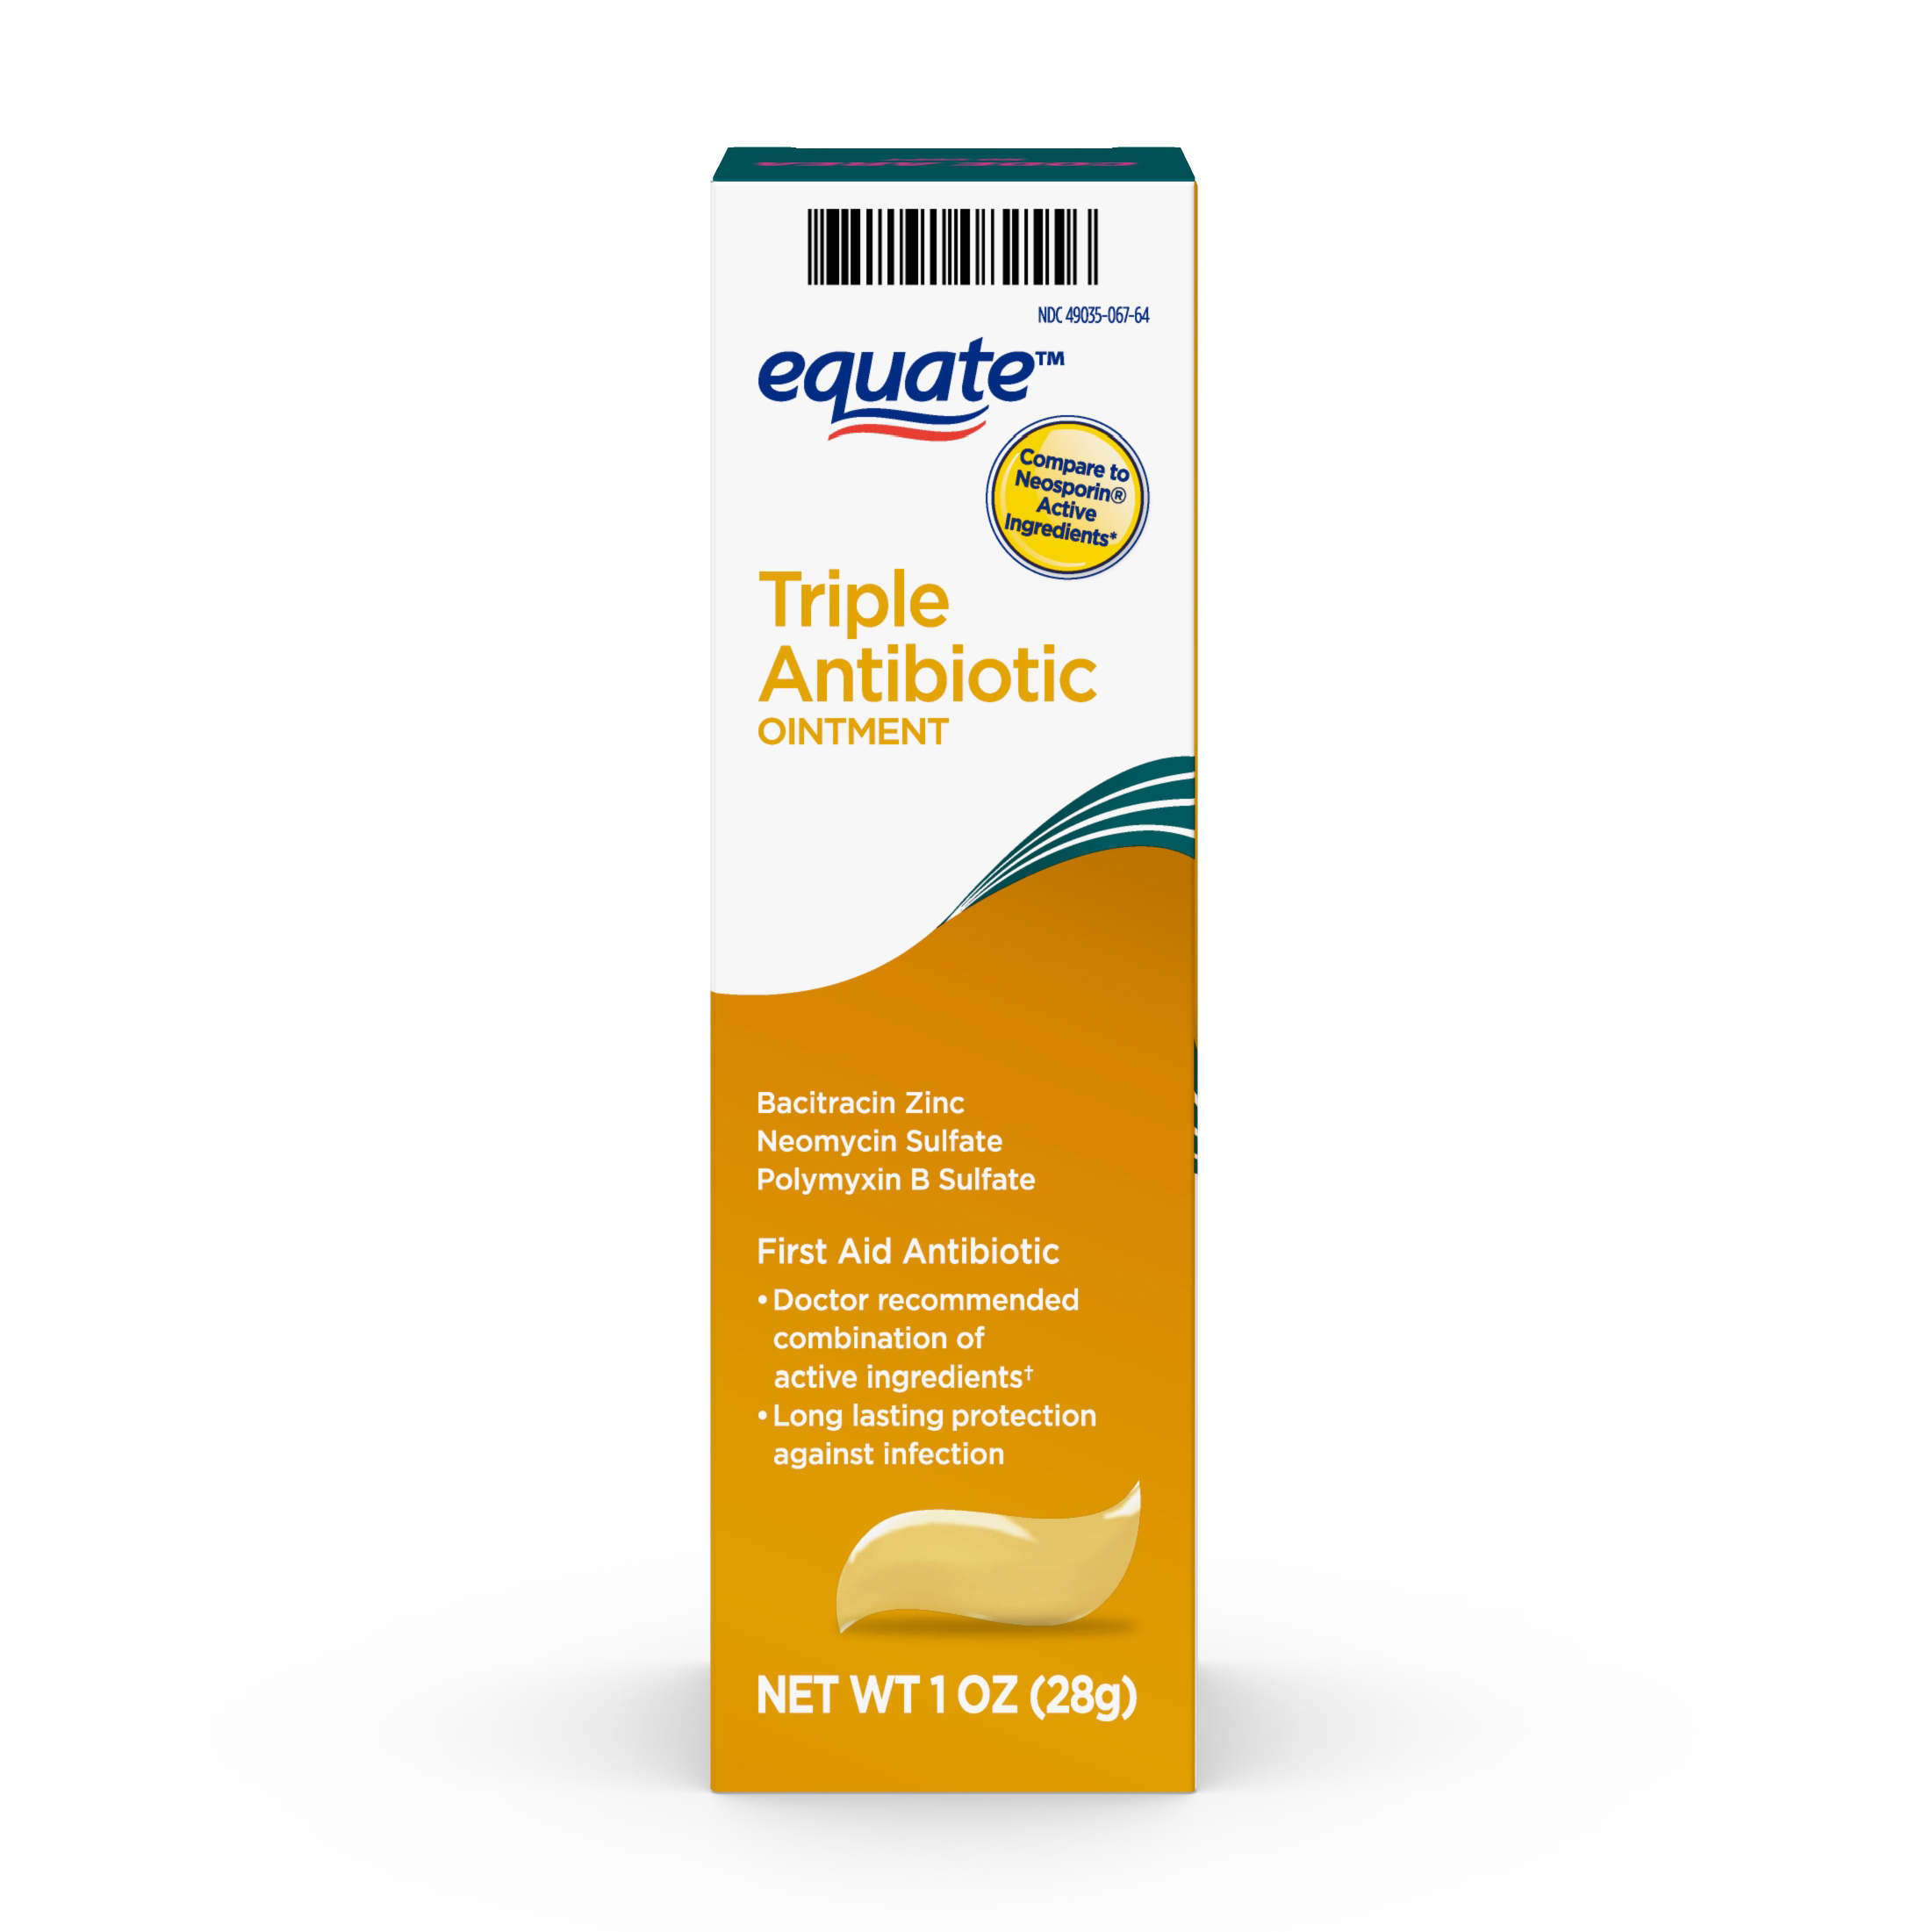 Equate First Aid Triple Antibiotic Ointment, Infection Protection, 1 oz - image 1 of 7